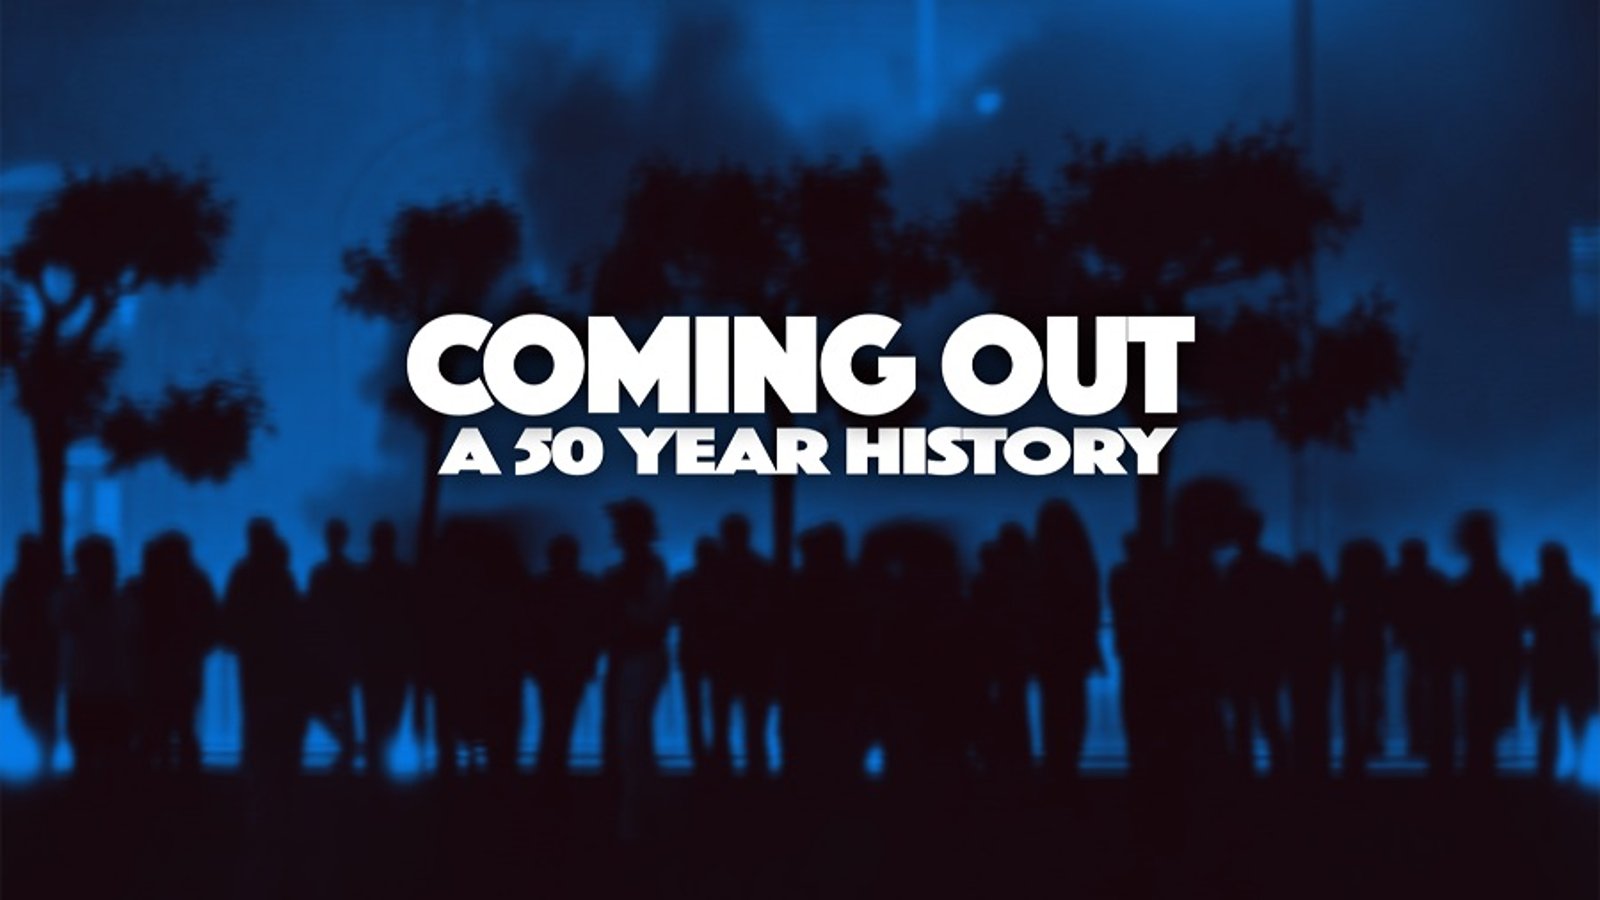 Coming Out: A 50 Year History - The History of the Public Gay Identity